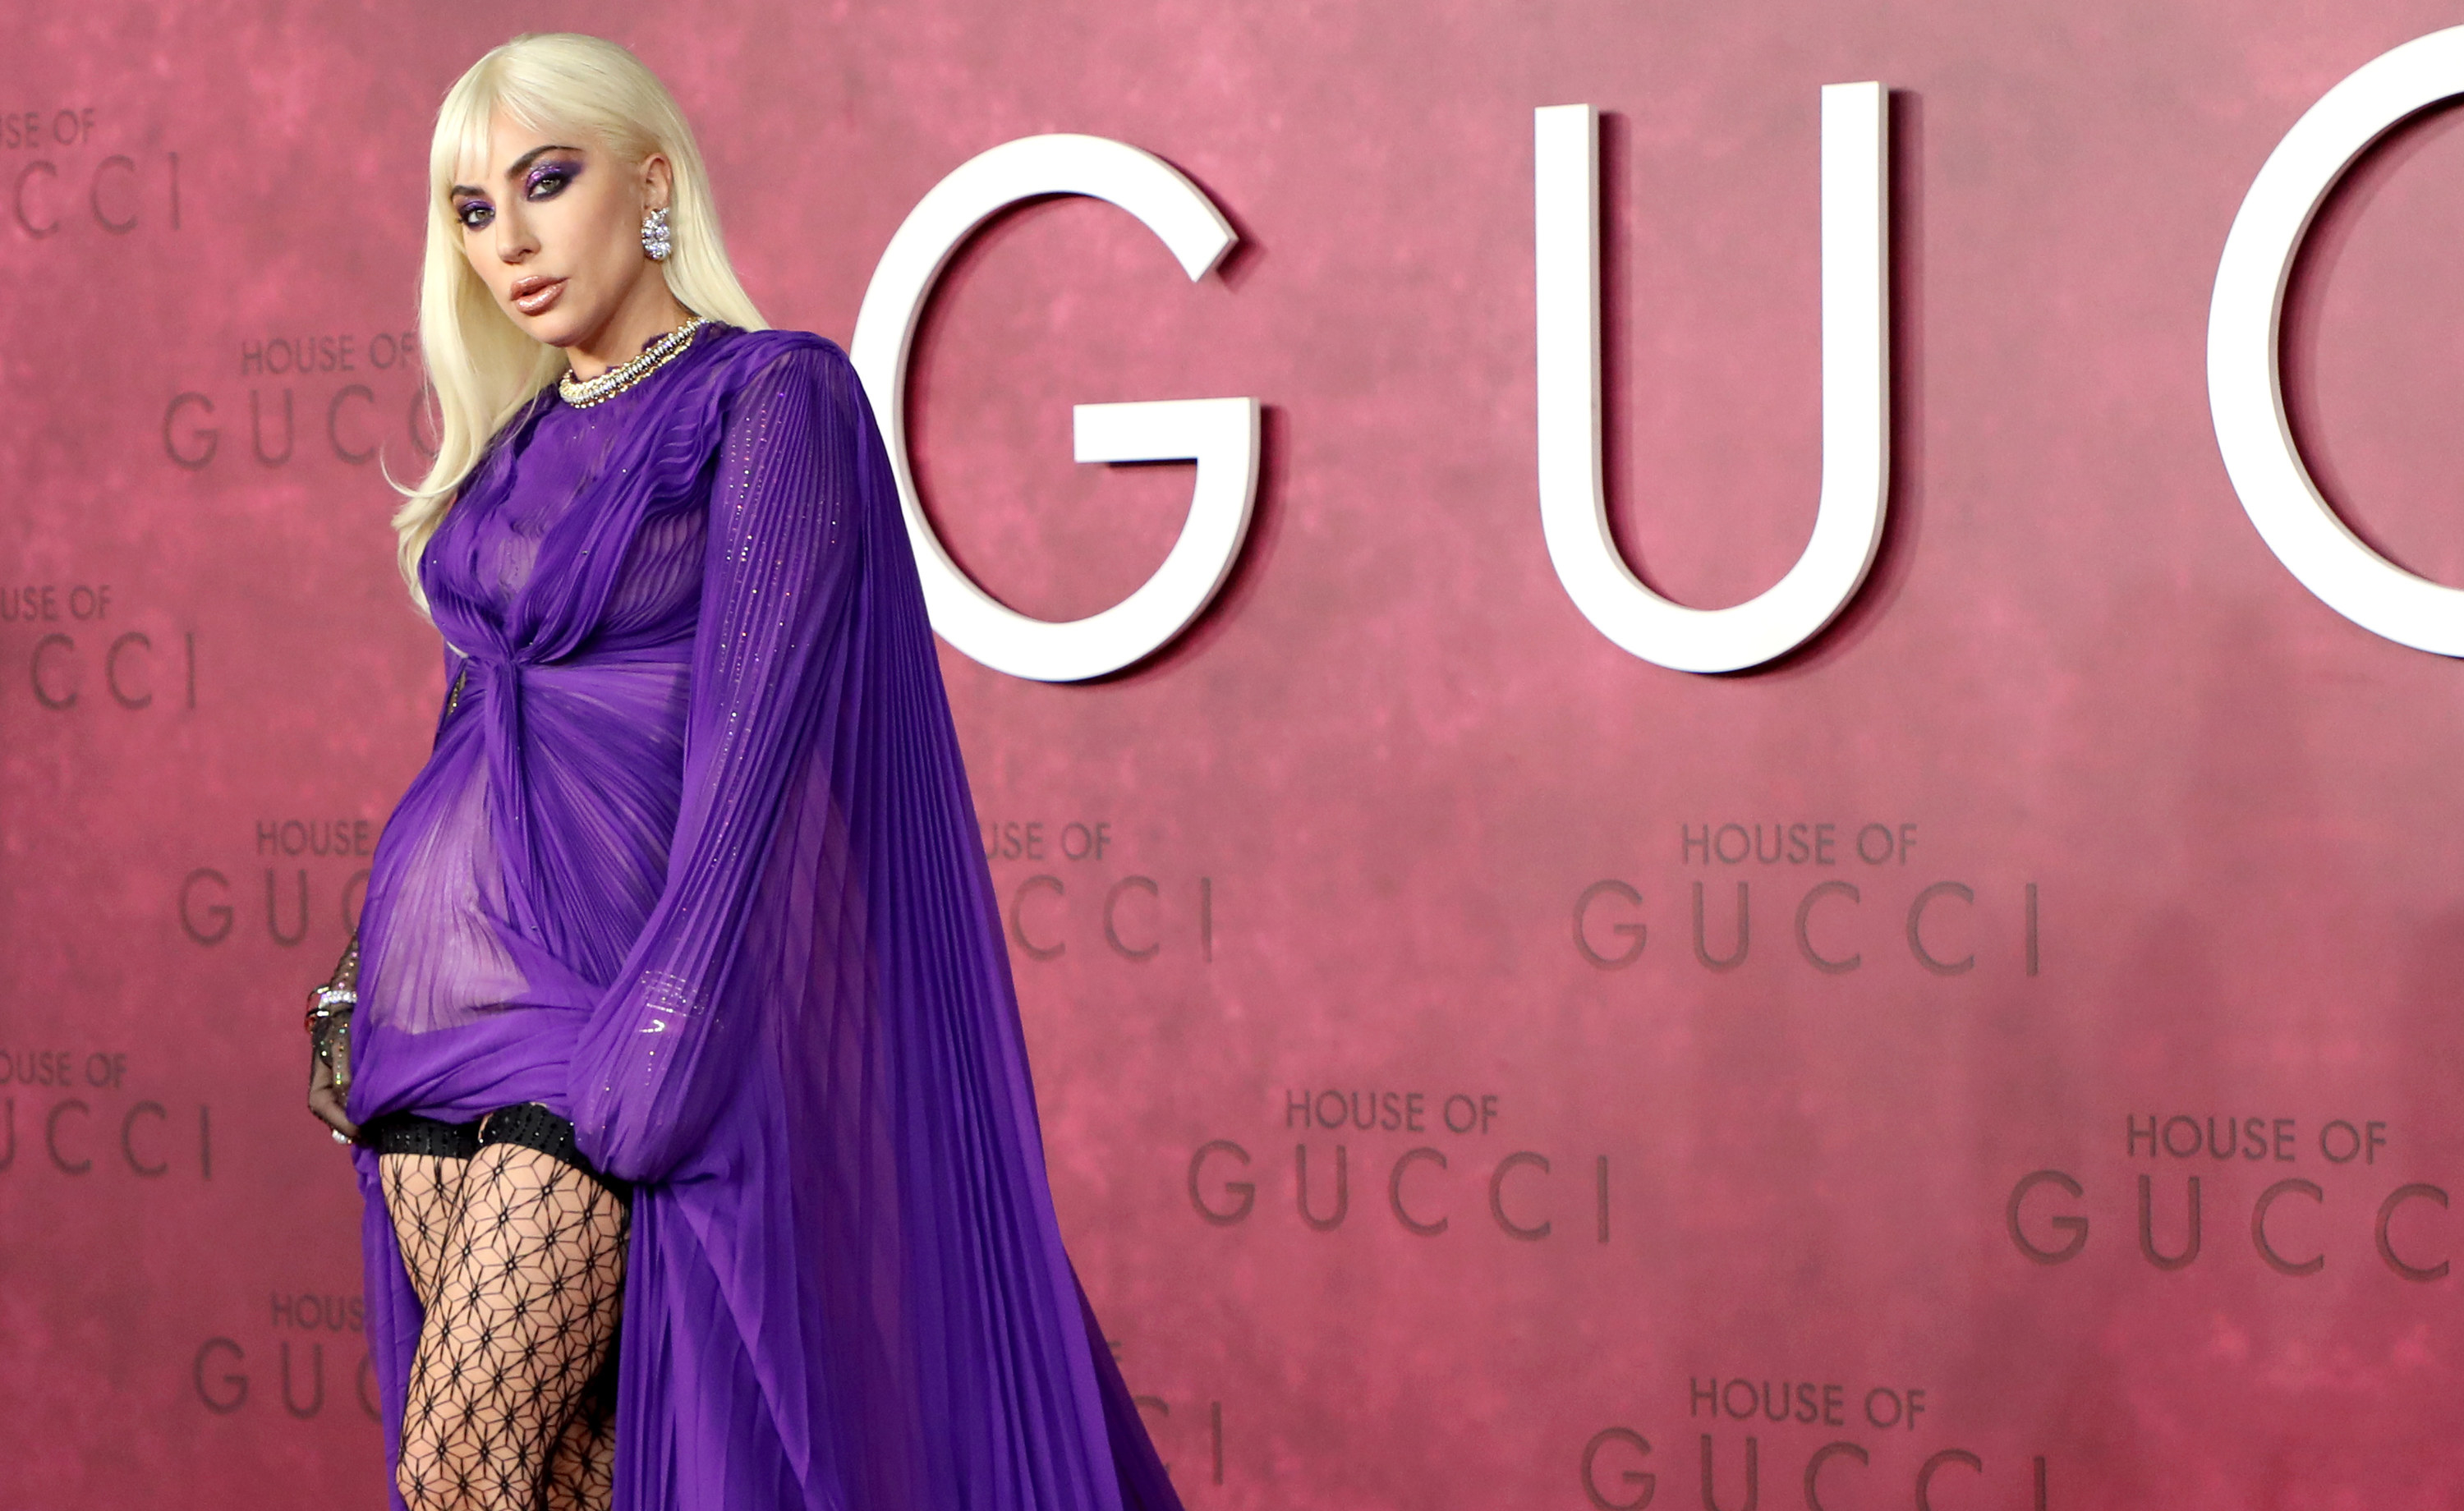 Gaga posing and looking like a total star in front of the House of Gucci sign